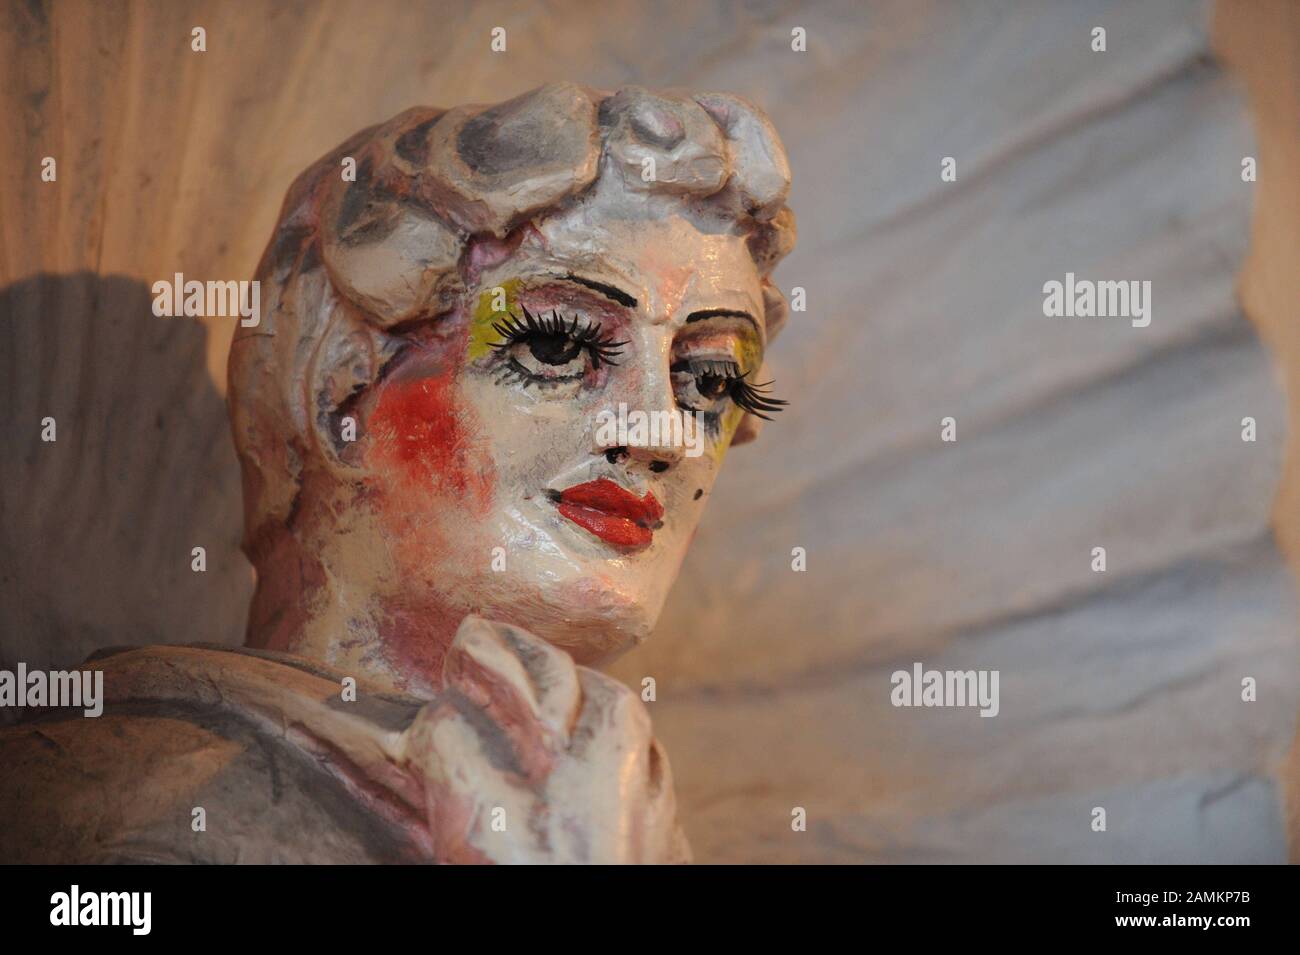 Head of a plaster figure in cinema hall 1 of the 'Museum Lichtspiele' cinema in the Munich floodplain, which was opened on 24 November 1910 as 'Gabriel's Tonbildtheater'. [automated translation] Stock Photo